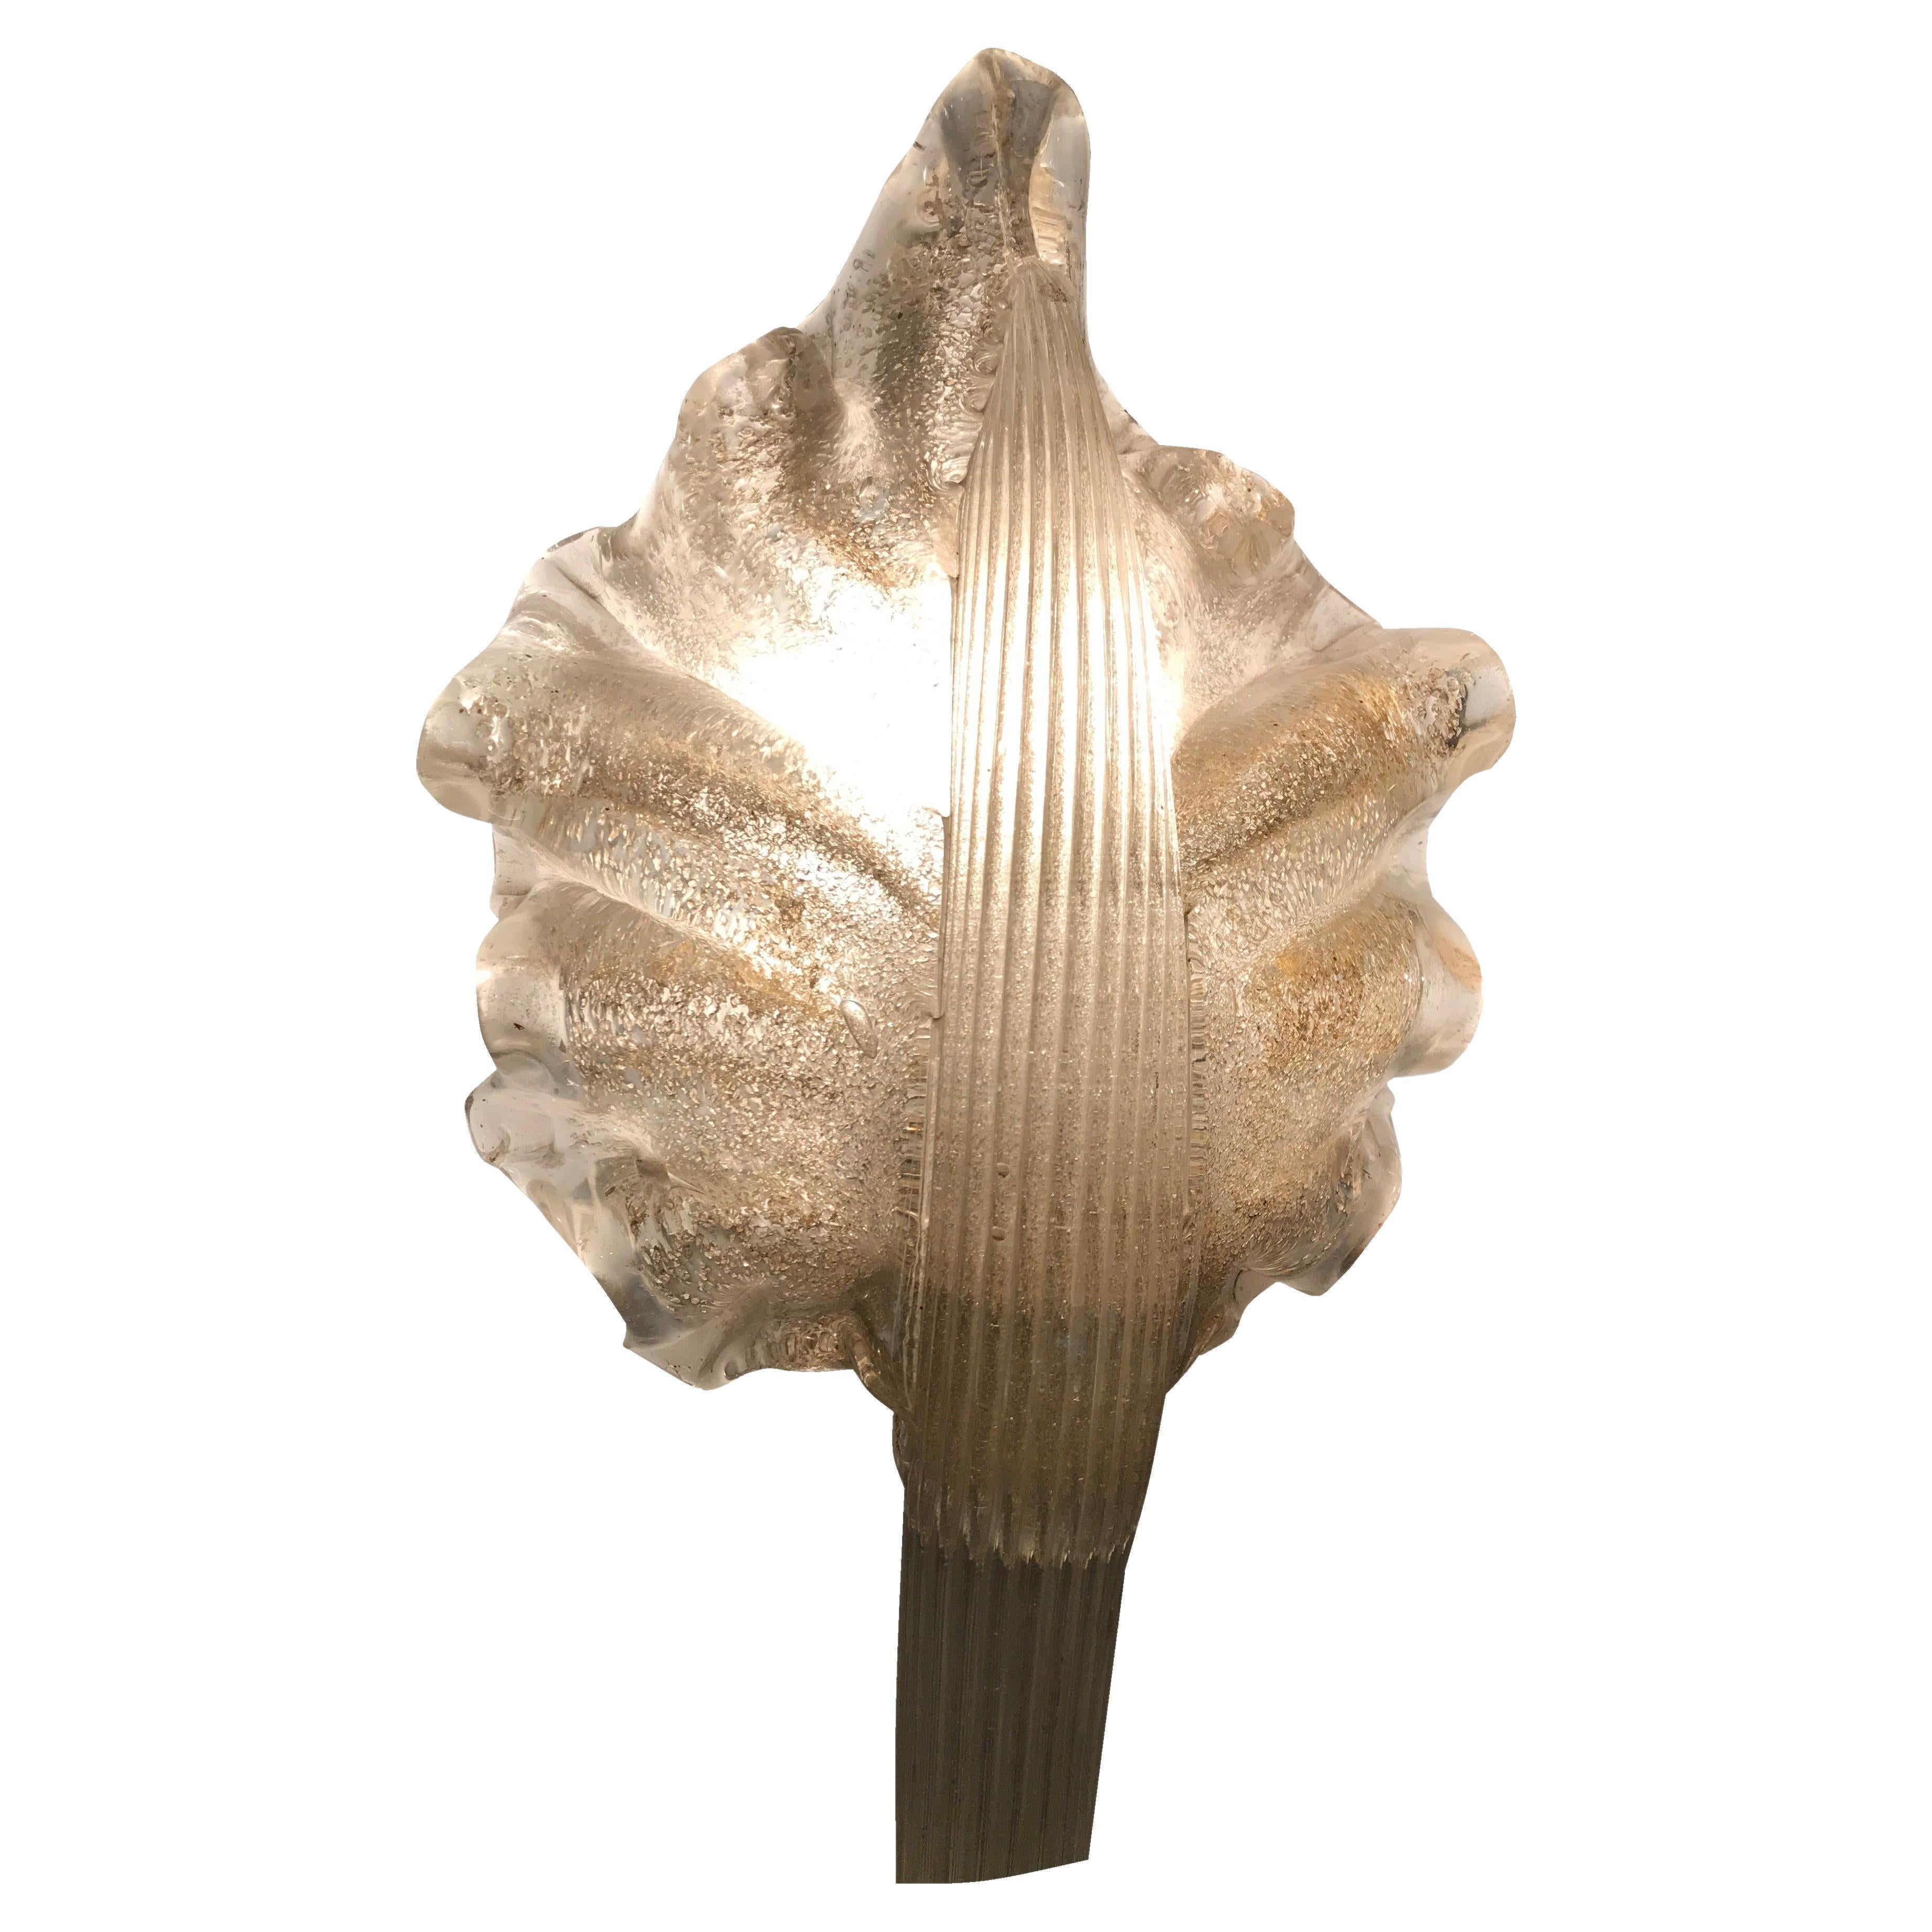 Sconce in Murano and Gold, Style, Art Deco, 1920, Italian